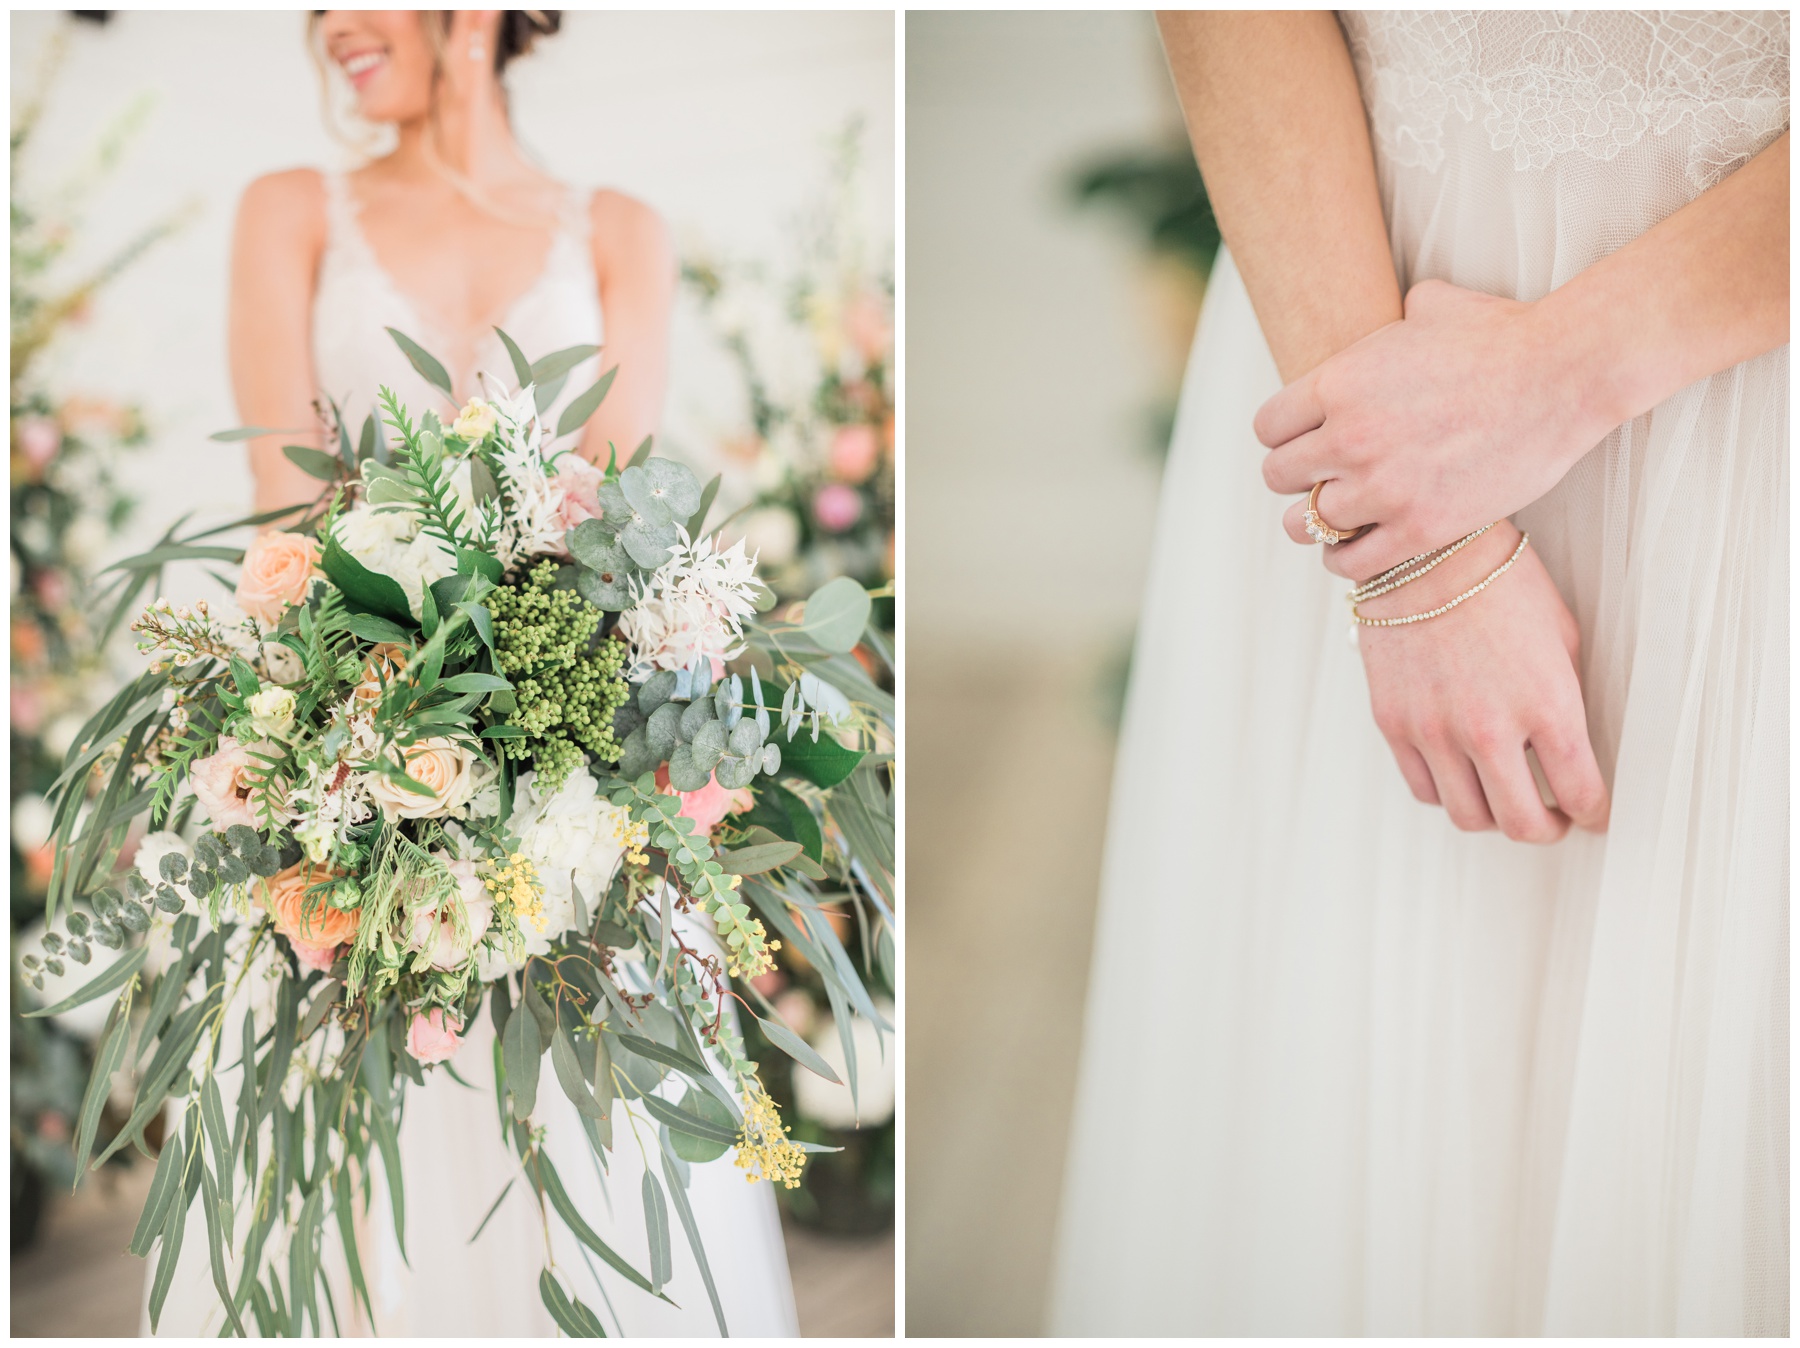 Oversized bridal bouquet with pink roses and eucalyptus from Analicia's Flower Shop